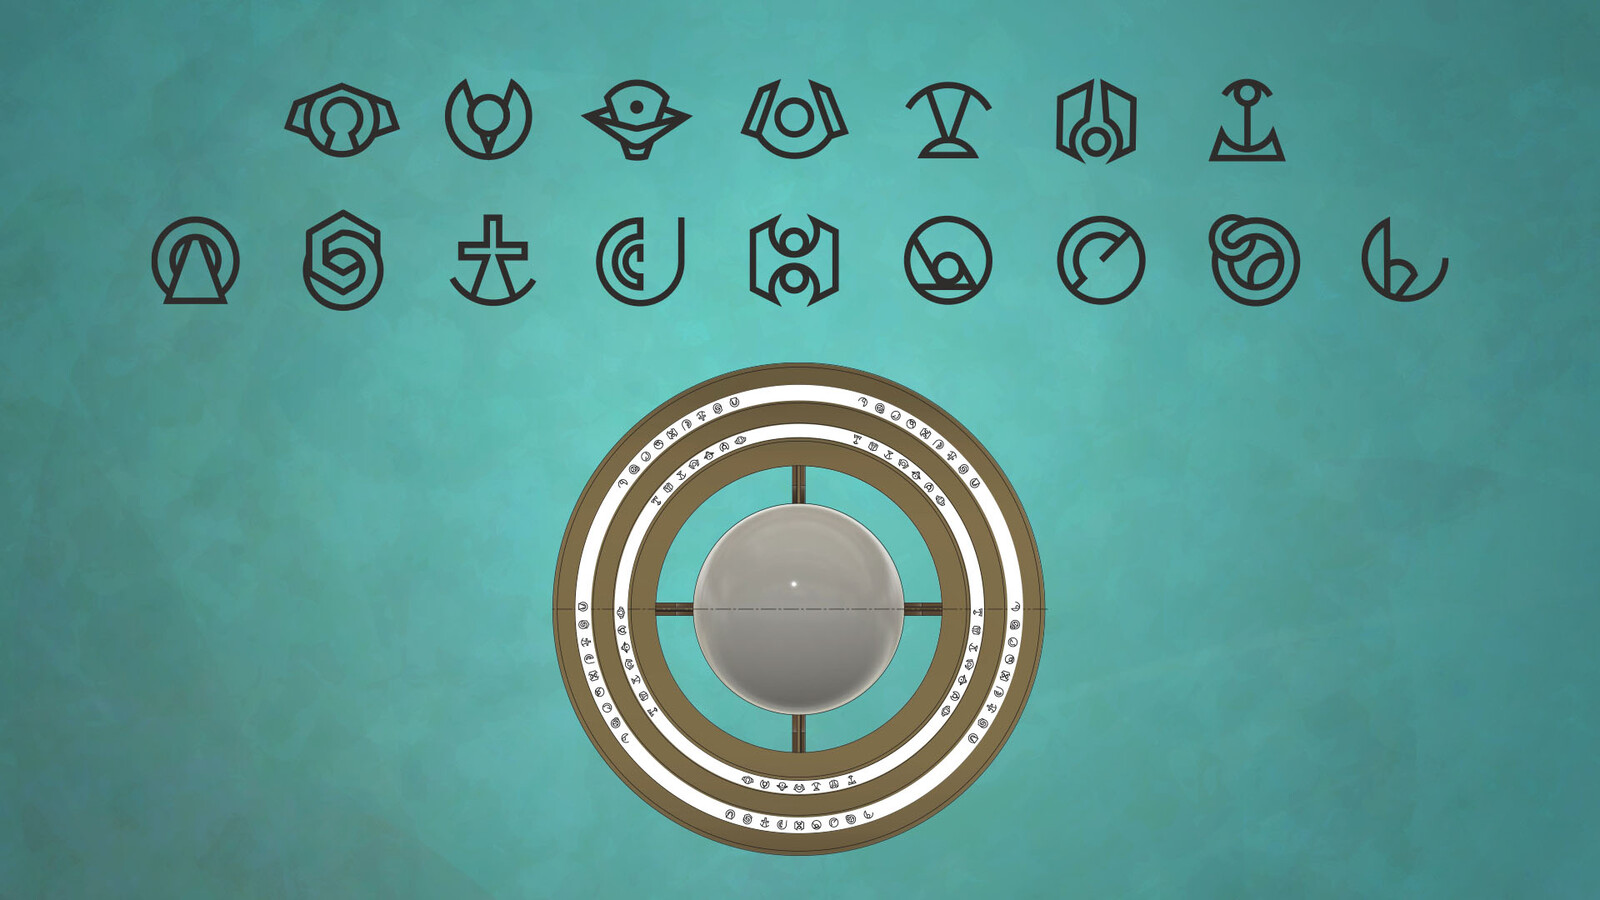 Control symbols for the central hub on the Invictus.